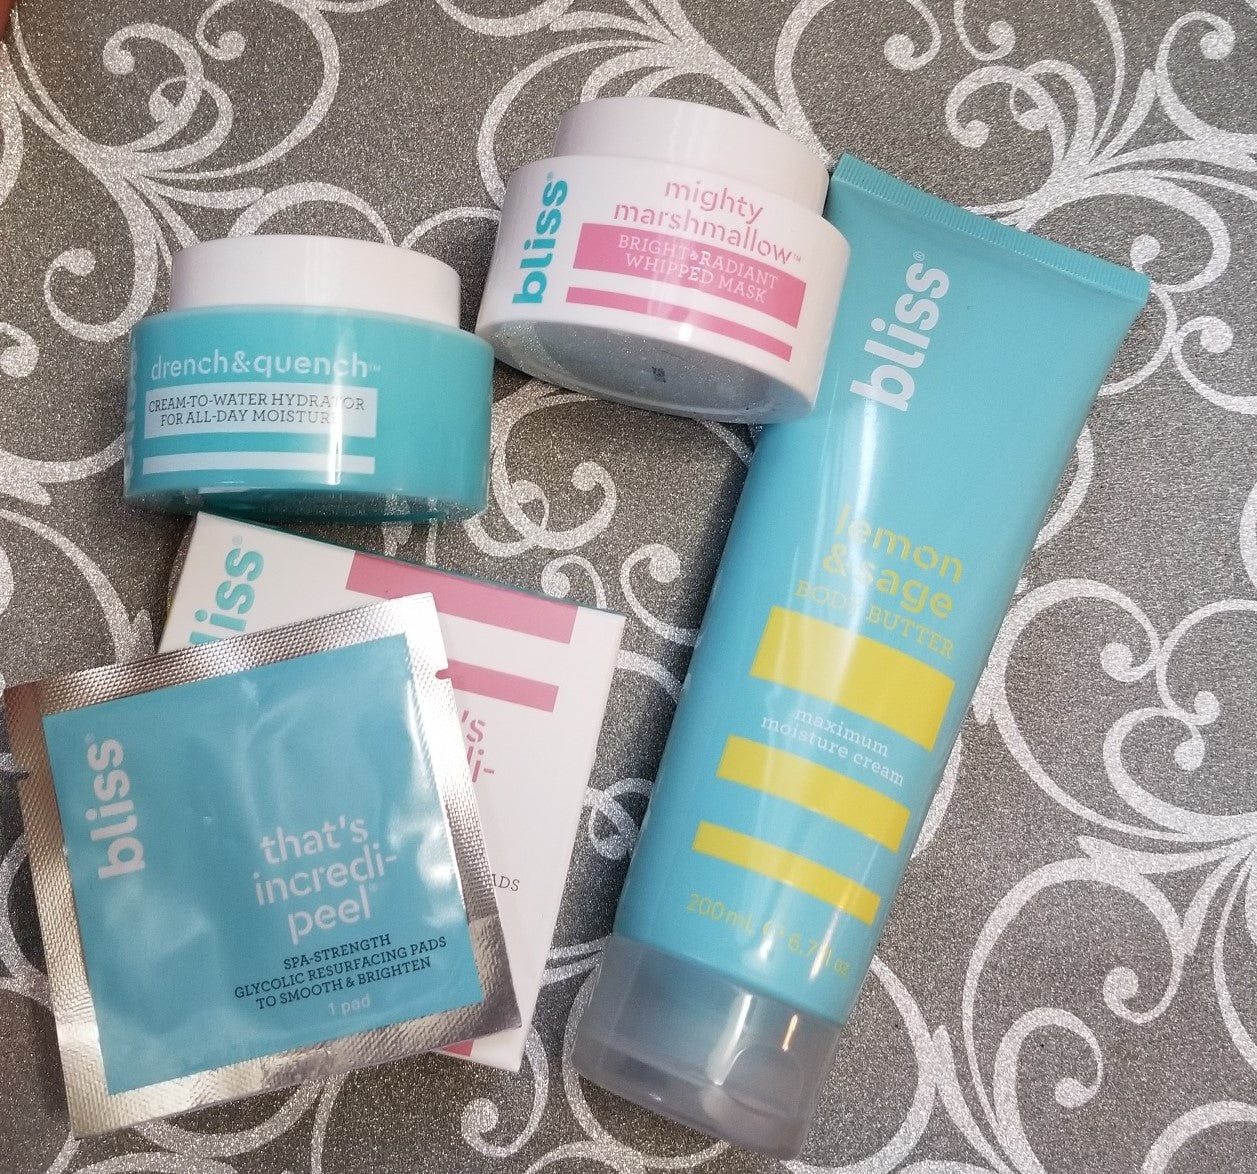 Review, Ingredients, Photos, Skincare Trend 2018, 2019, 2020: Bliss, That's Incredi-Peel Pads, Drench & Quench Moisturizer, Mighty Marshmallow Mask, Lemon & Sage Body Butter